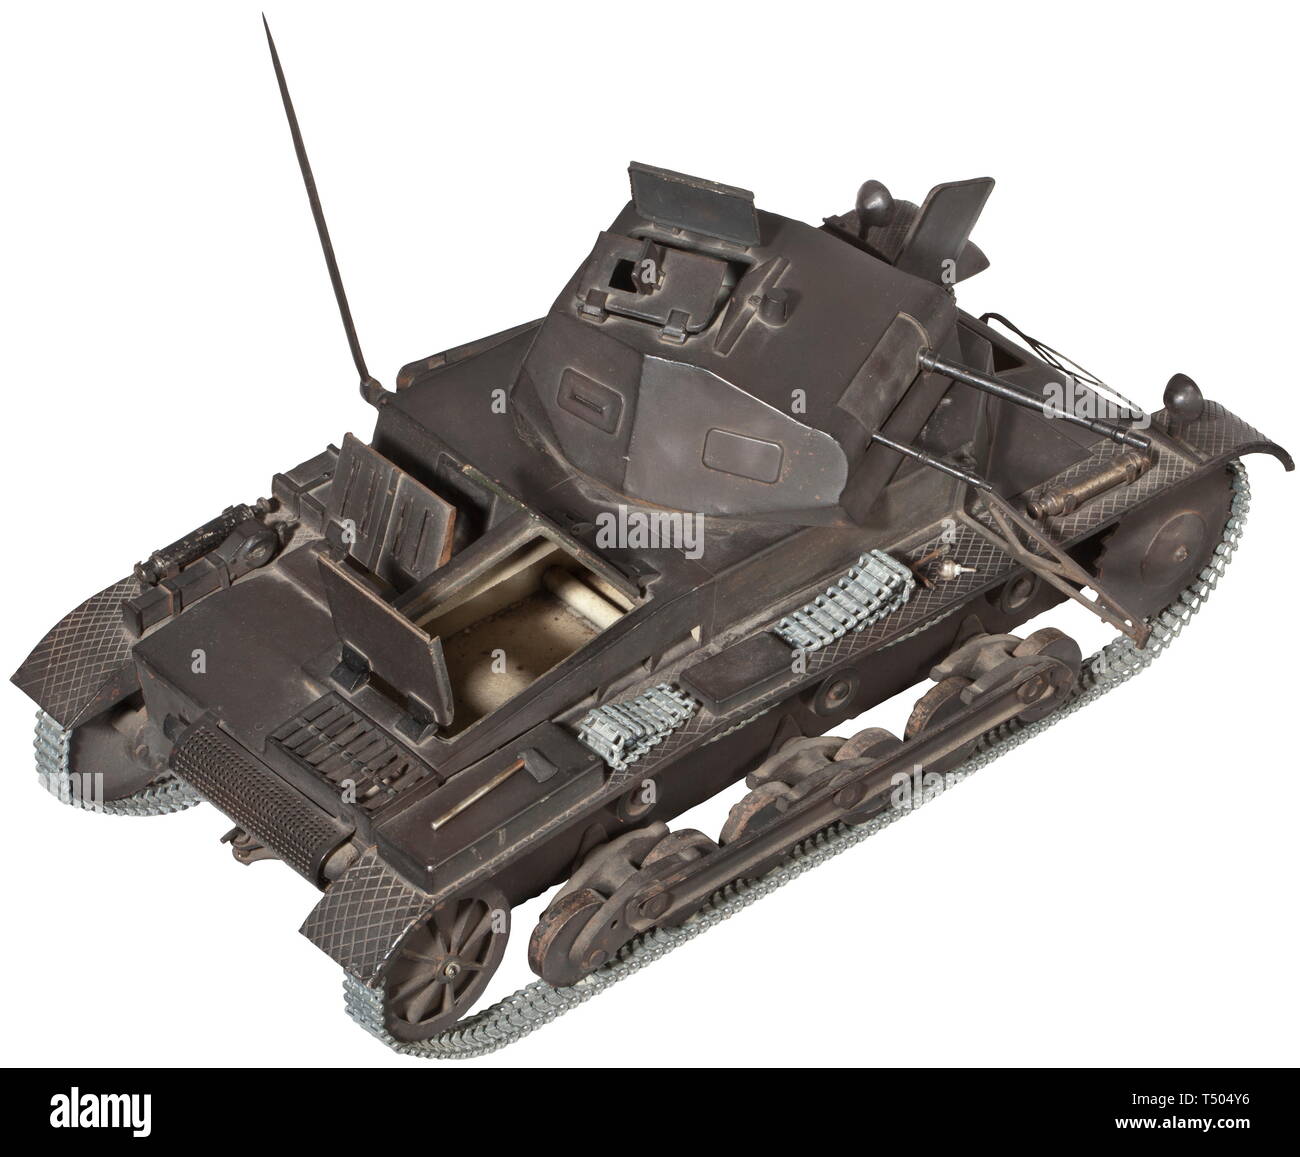 A model of a Panzerkampfwagen II Detailed workmanship, probably for instructional use in a training unit. Black-painted steel, welded hull, movable running gear, rotatable turret, movable MG and automatic cannon, foldable antenna, collapsible hatches, tow cable, spare chain links, axe. Without motor, the chain supplemented, age marks. Dimensions 60 x 26.5 x 26.5 cm. Very rare. historic, historical, 20th century, armoured corps, armored corps, tank force, tank forces, branch of service, branches of service, armed service, armed services, military, militaria, utensil, piece o, Editorial-Use-Only Stock Photo